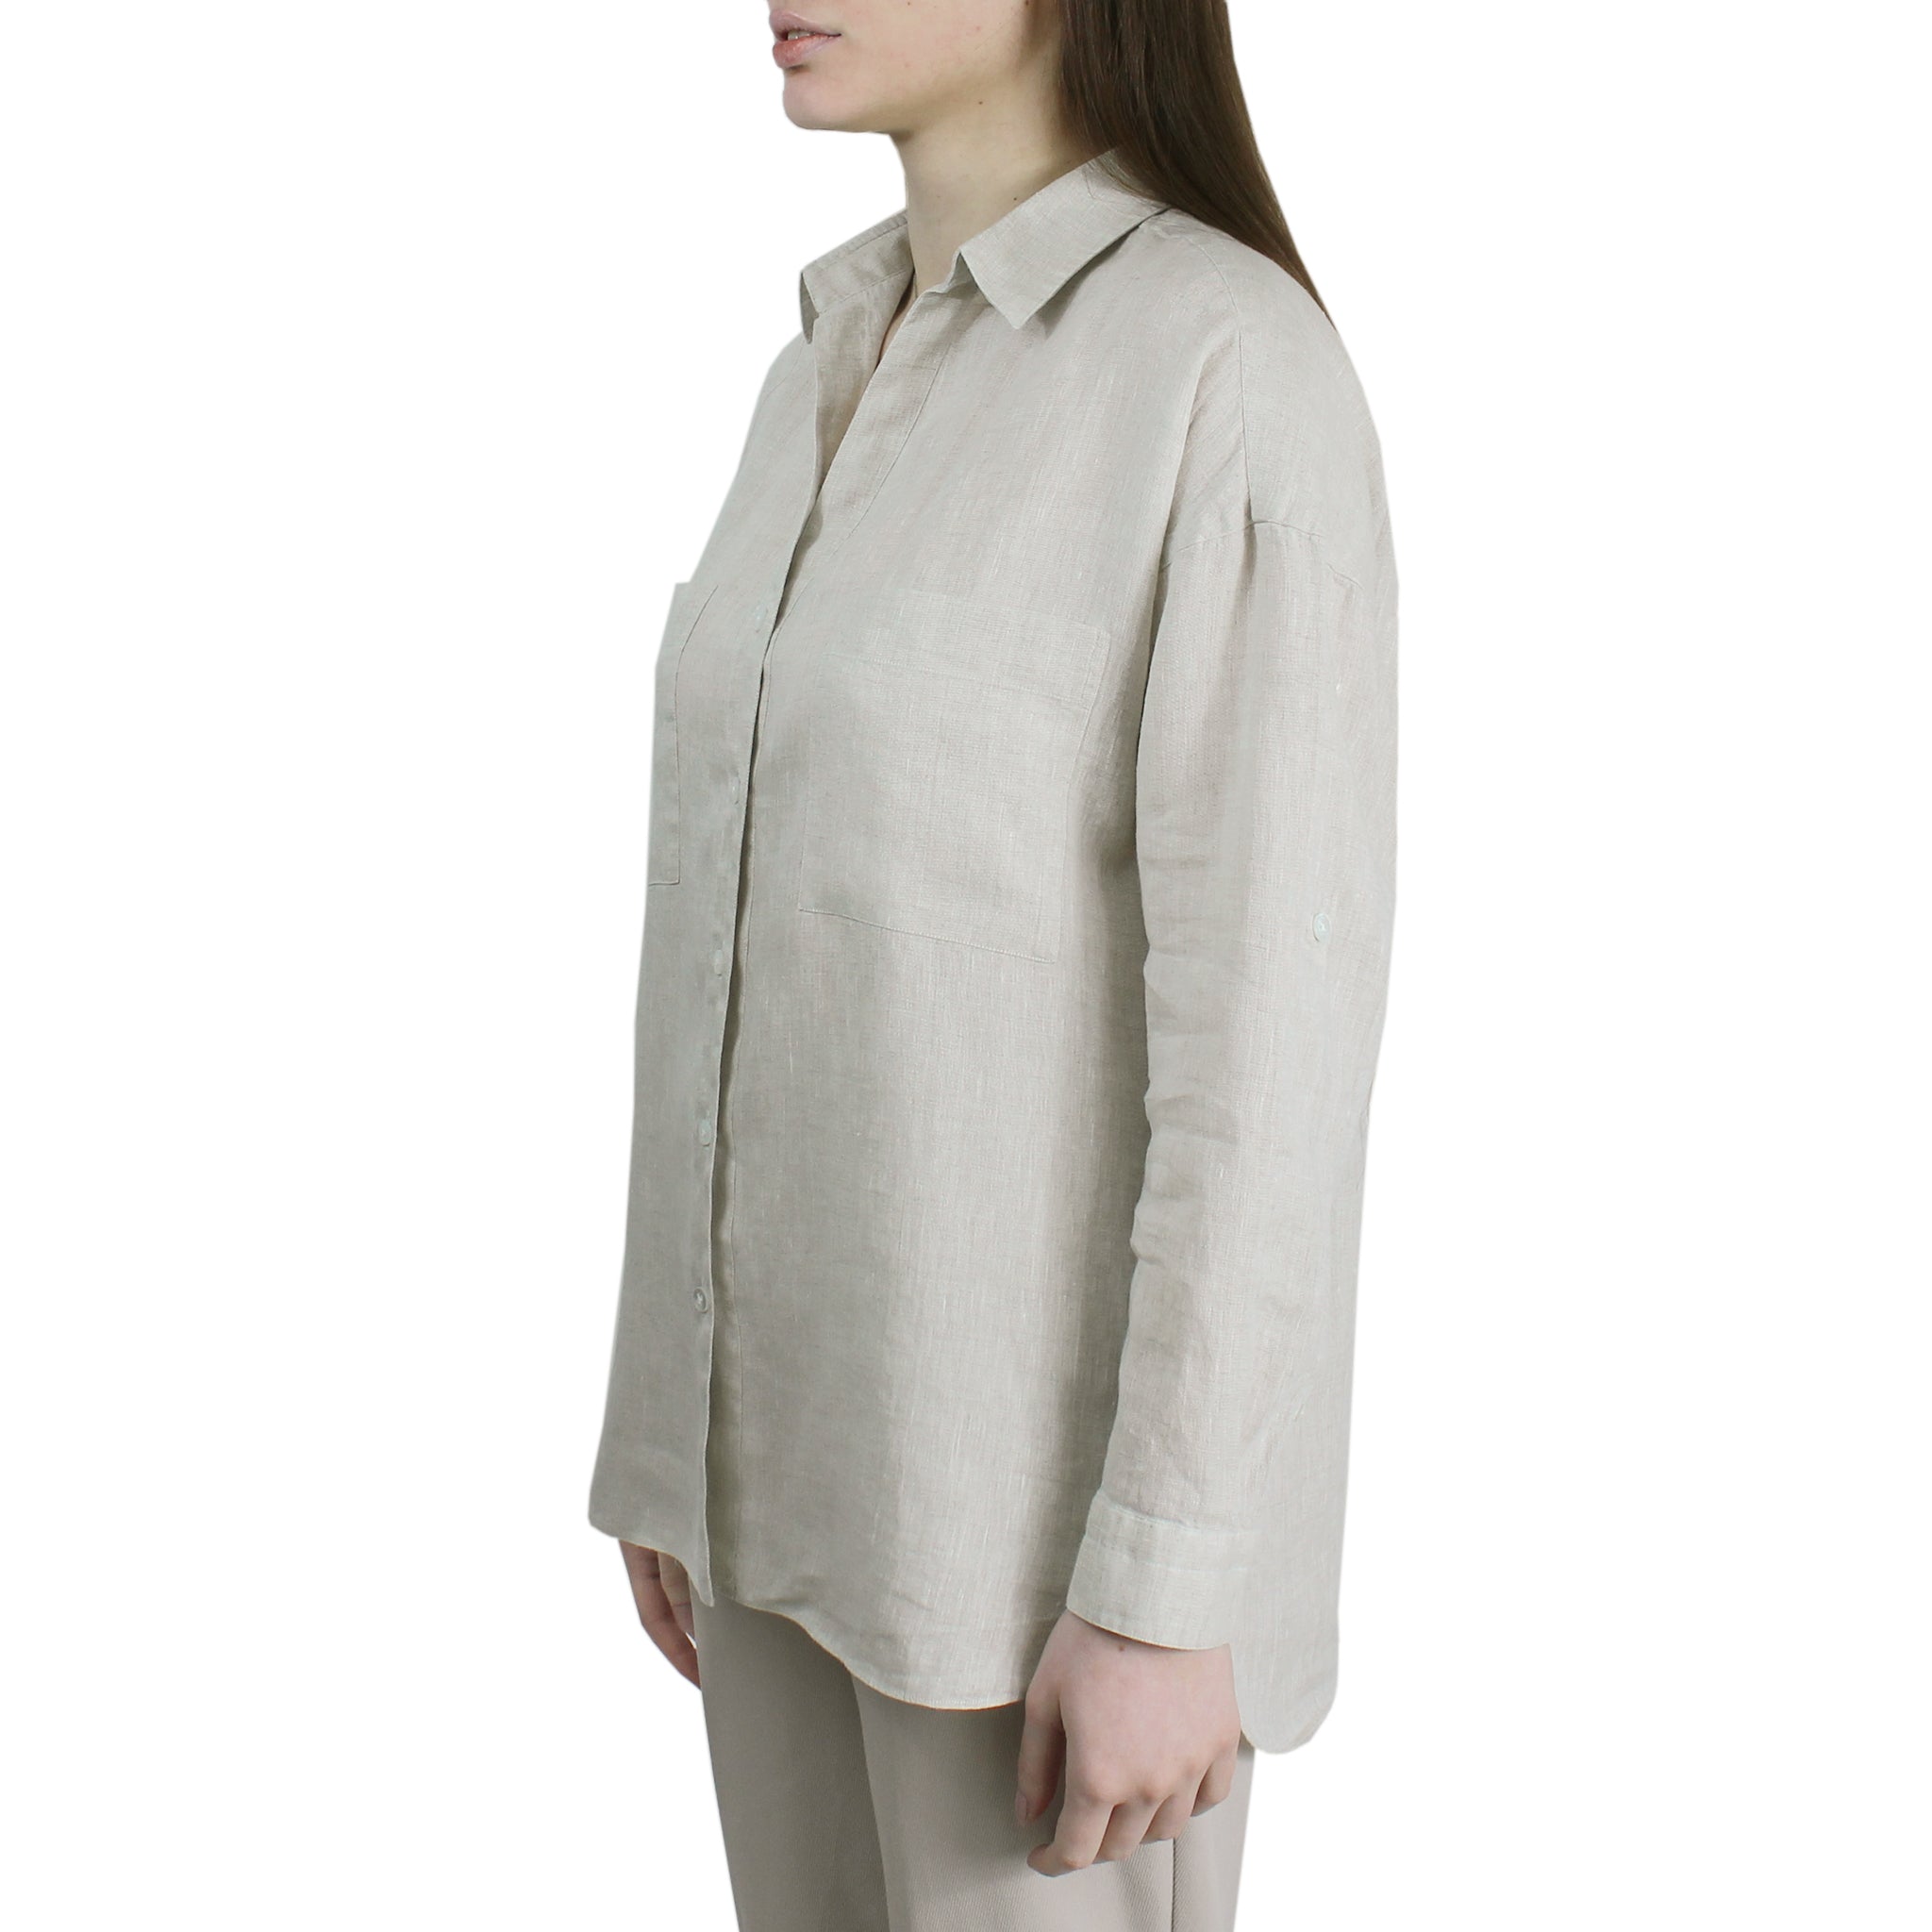 Sand linen shirt with pockets and webbing to adjust the sleeve